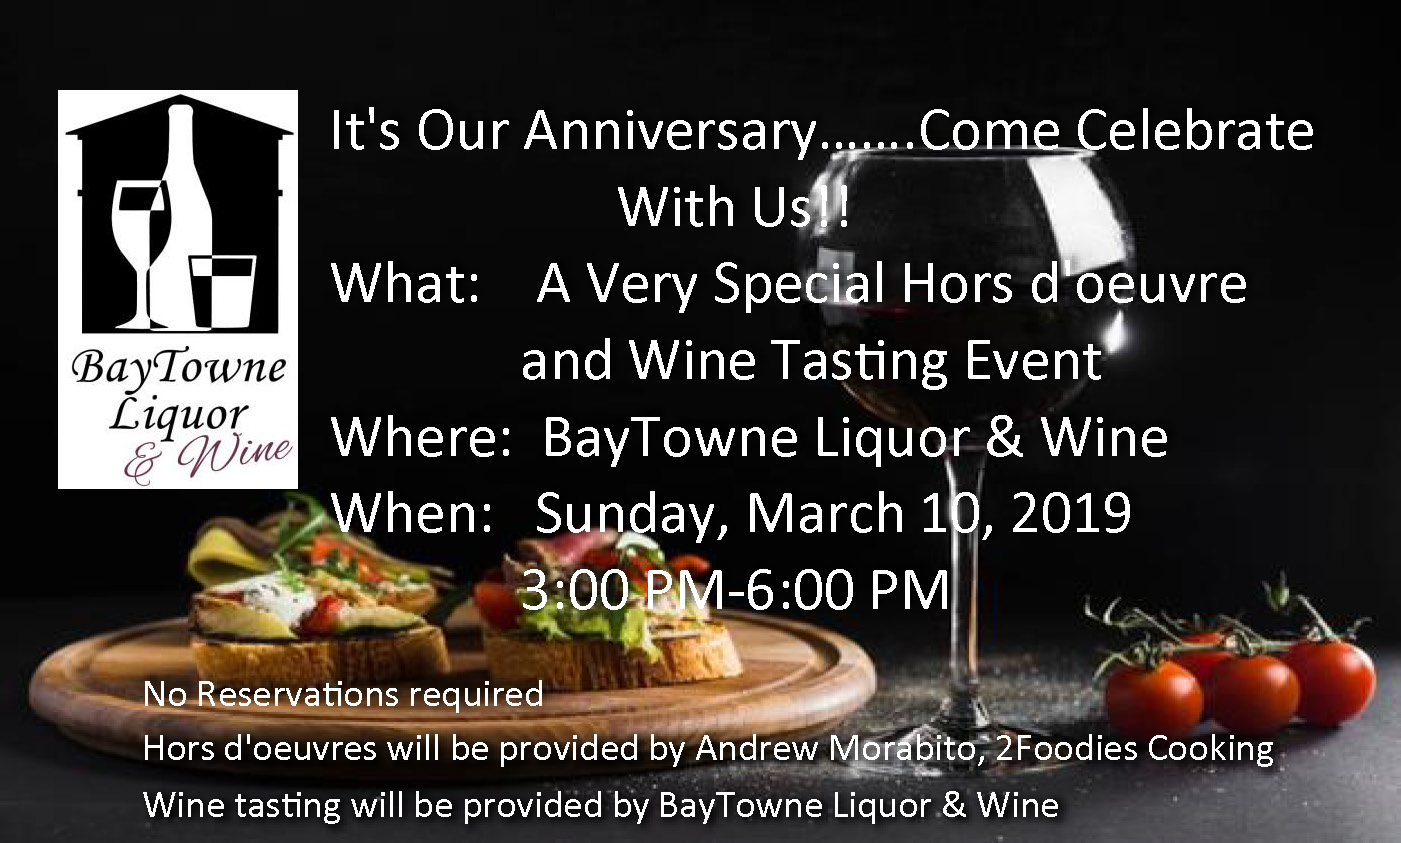 Come celebrate our anniversary with us!